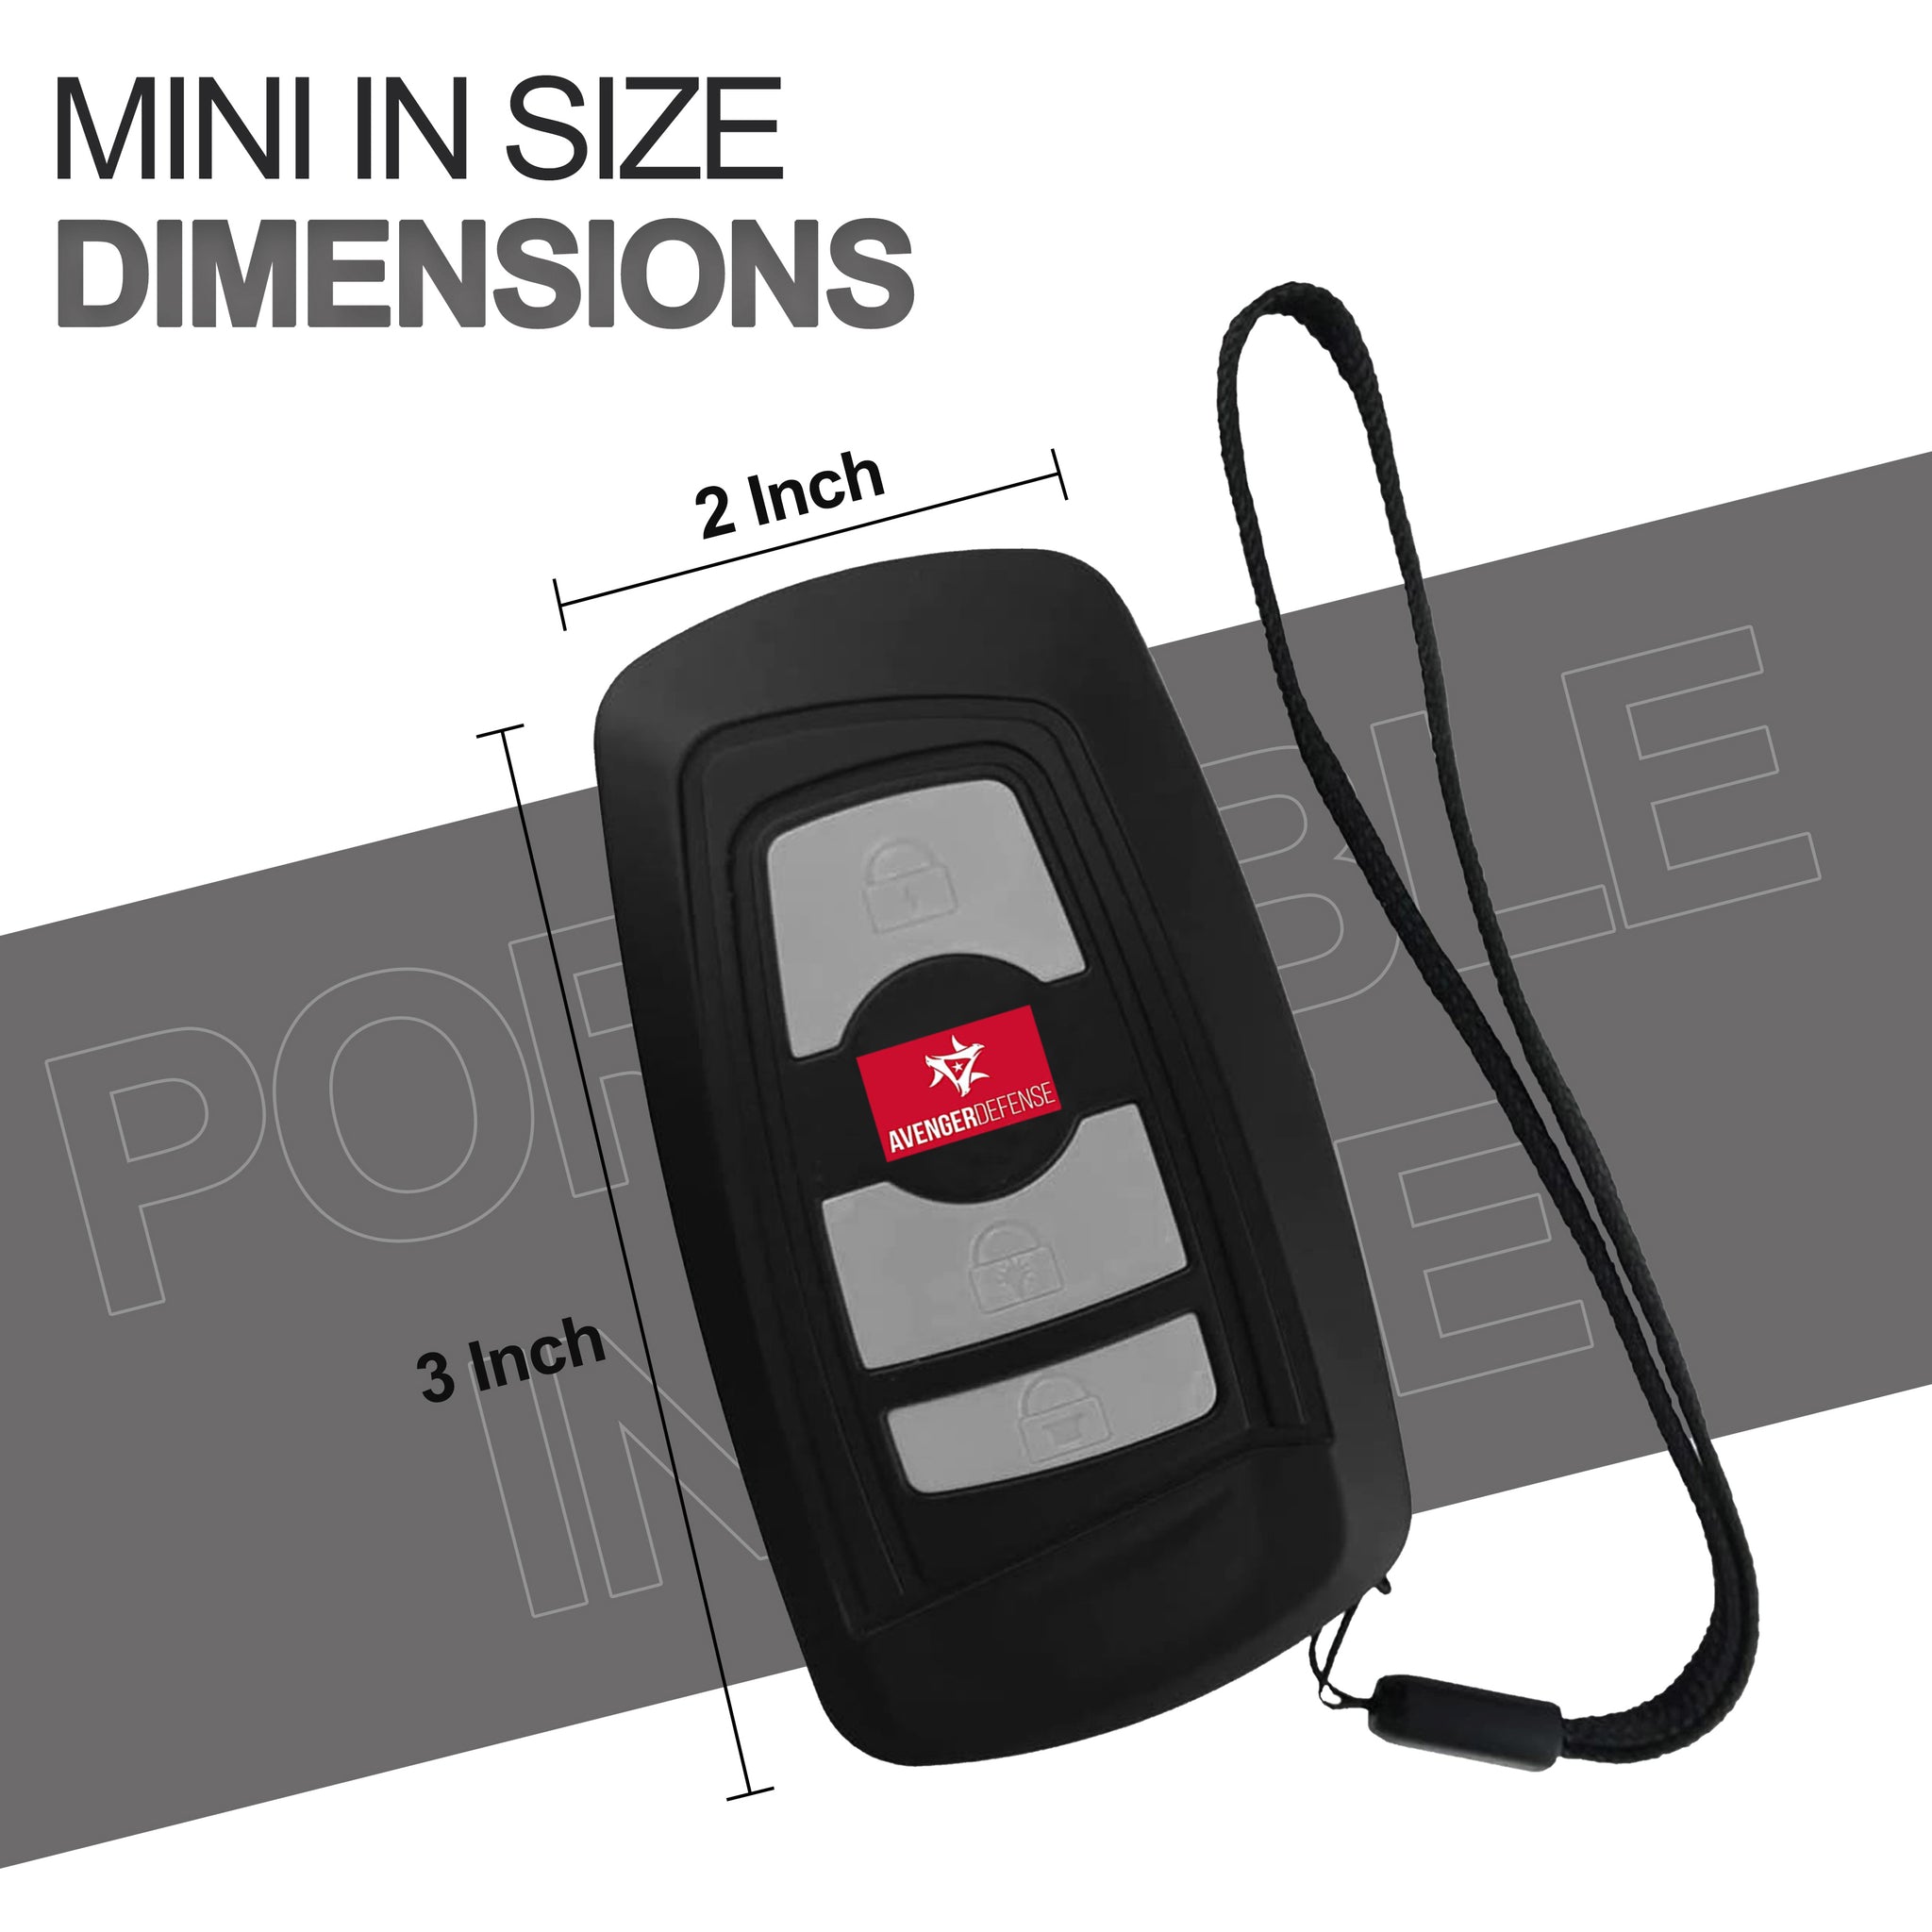 Avenger Defense ADS-70P - Mini Stun Gun Key fob Design with Security Alarm – Rechargeable 1.2 µC Charge Powerful Self Defense – LED Flashlight and Wrist Strap - Pink, Black